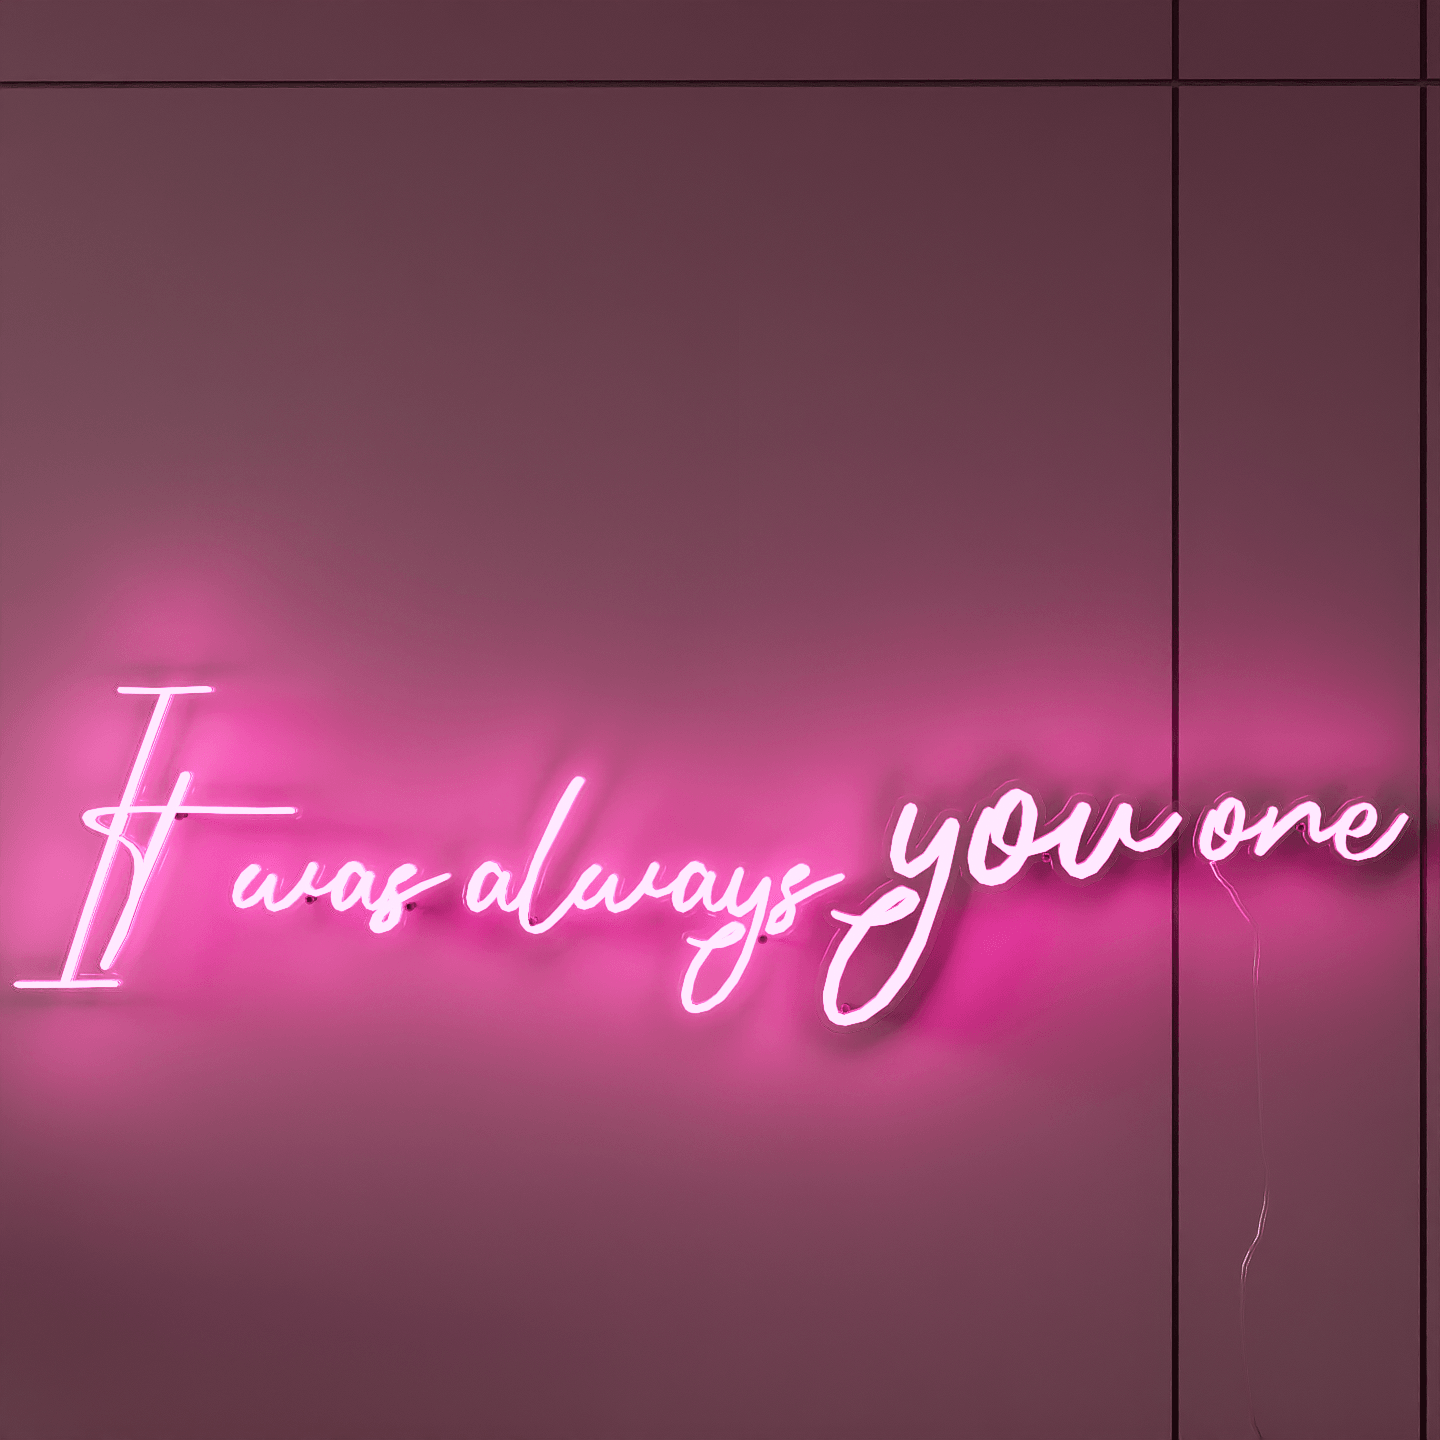 frontal-shot-of-lit-pink-neon-lights-hanging-on-the-wall-for-display-it-was-always-you-one